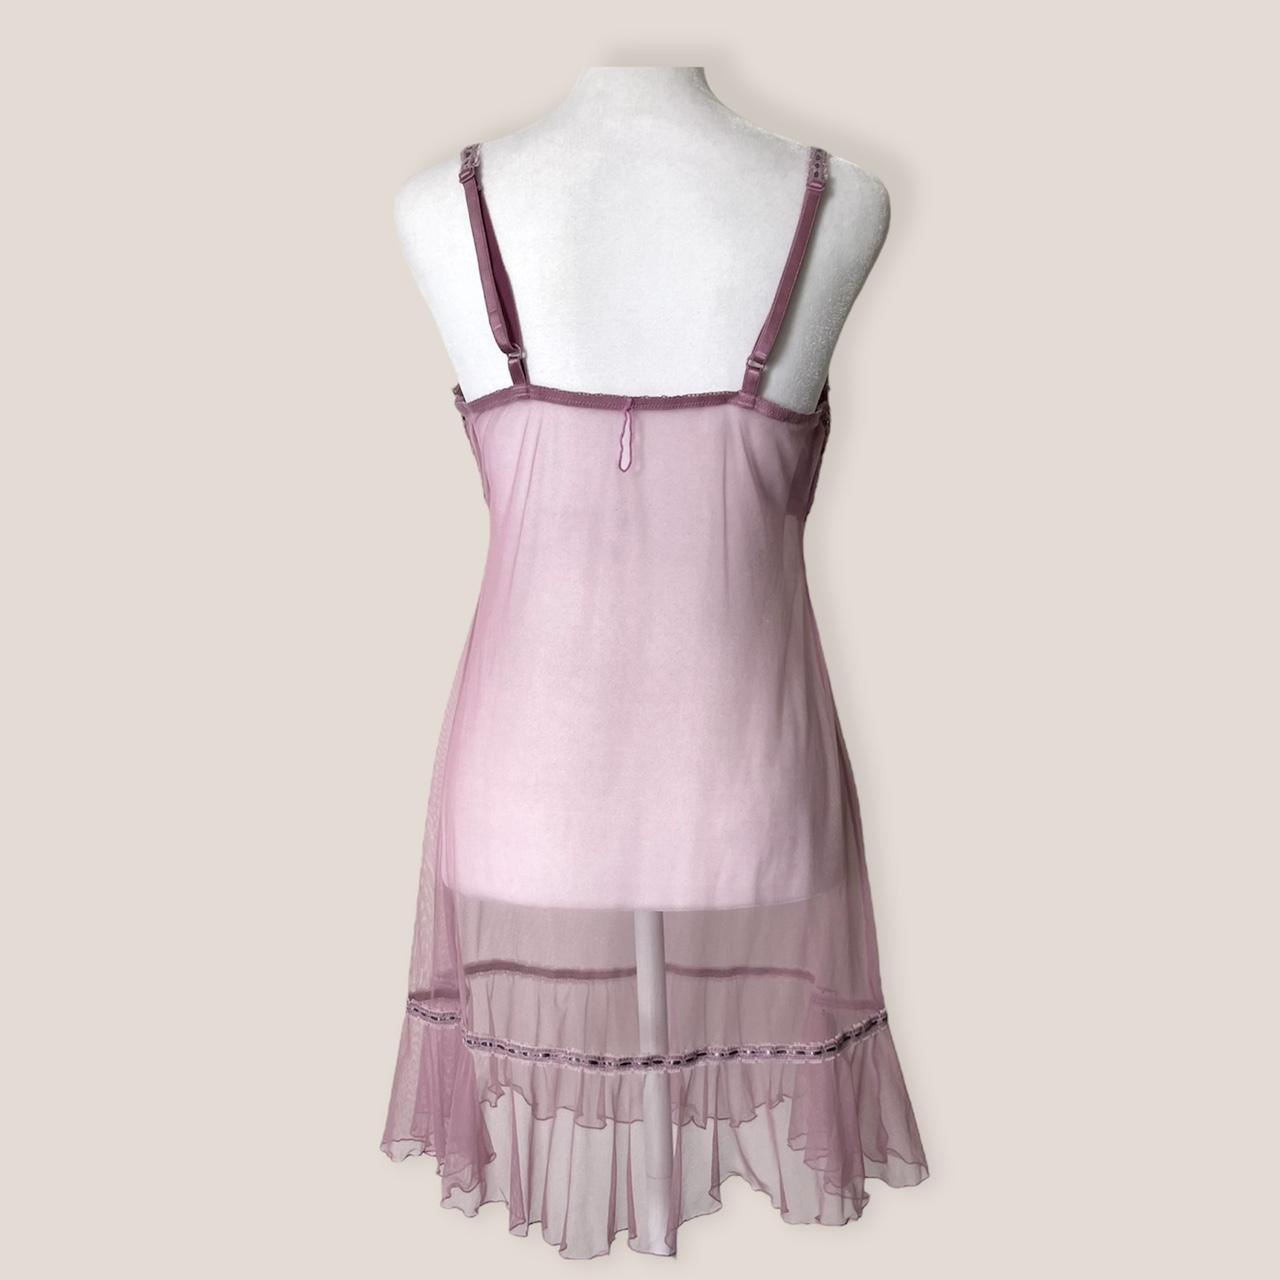 Product Image 3 - ✿Lilac sheer lace chemise✿
The prettiest